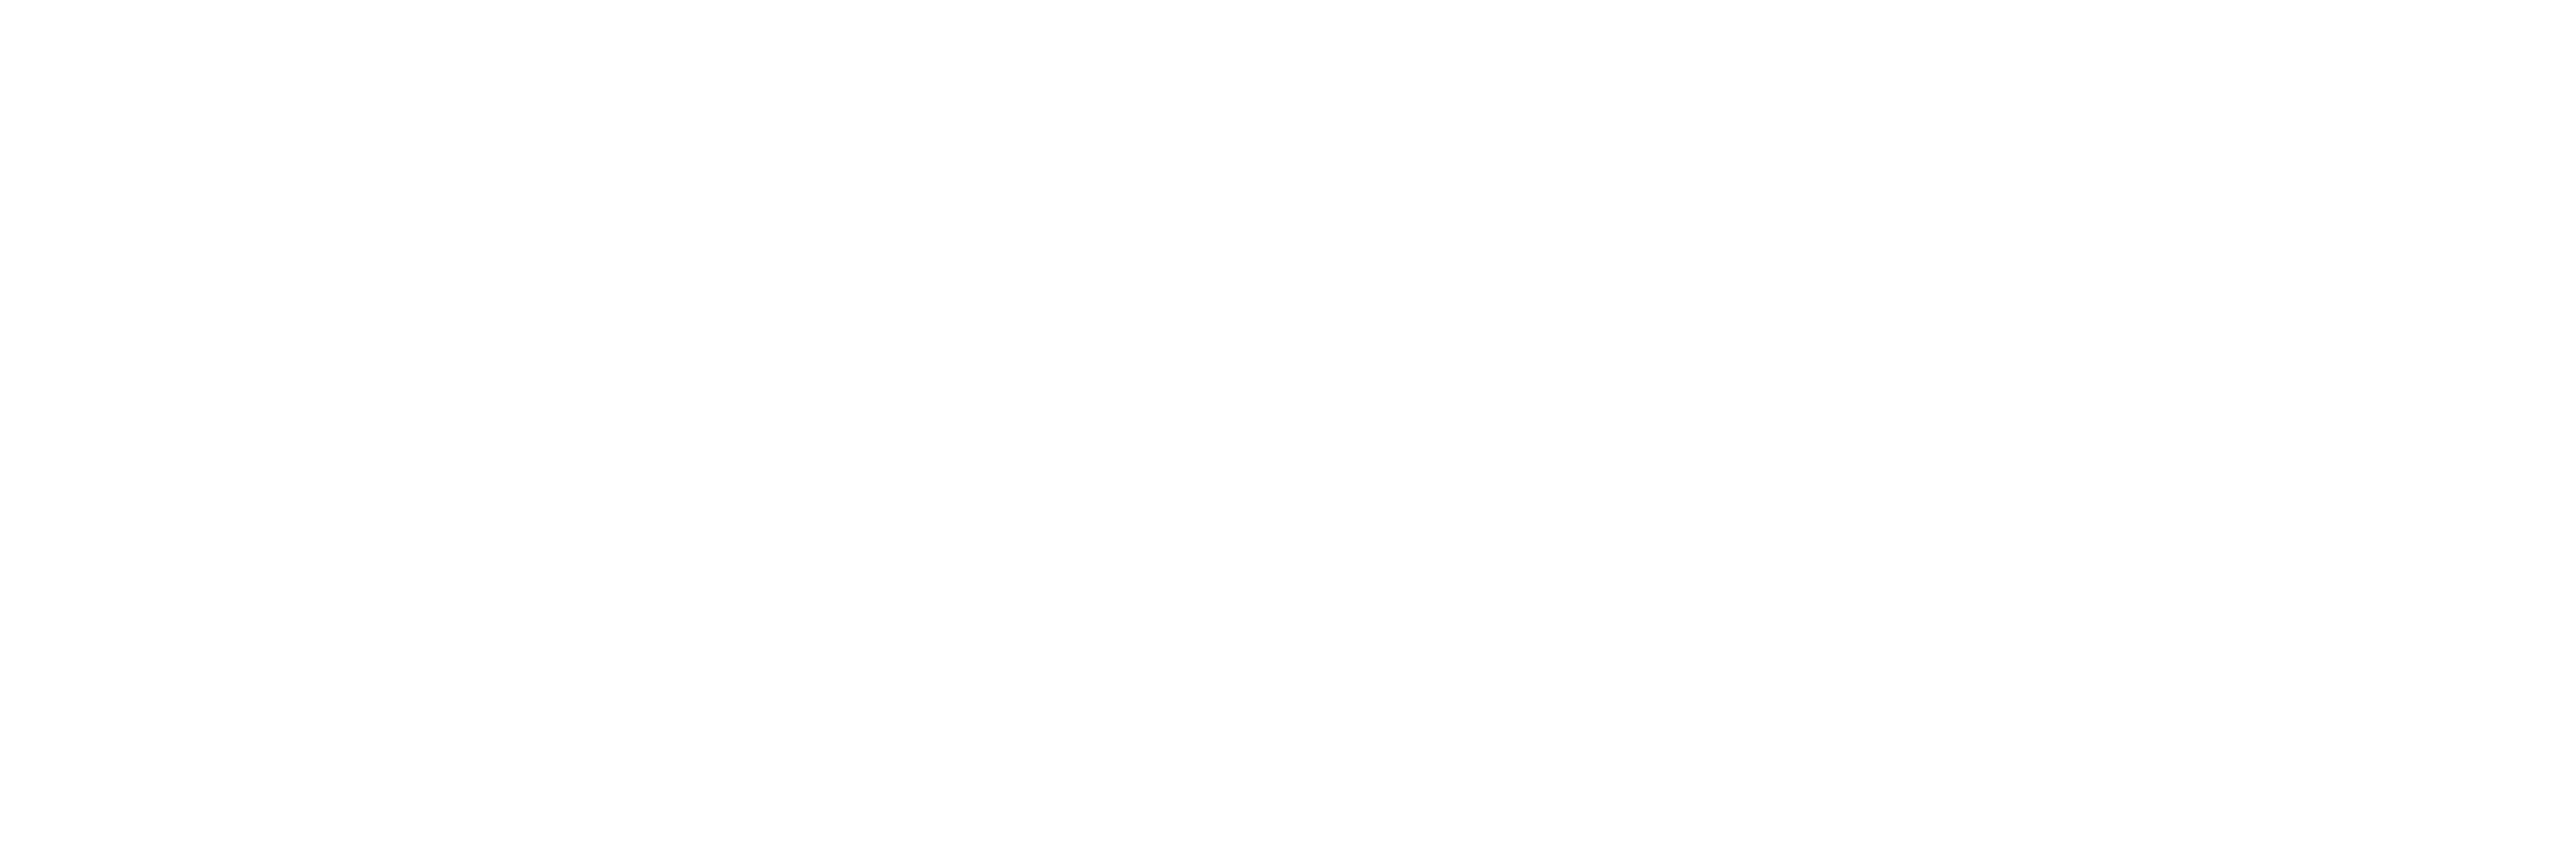 All-white knockout logo for custom software development company Findan Software